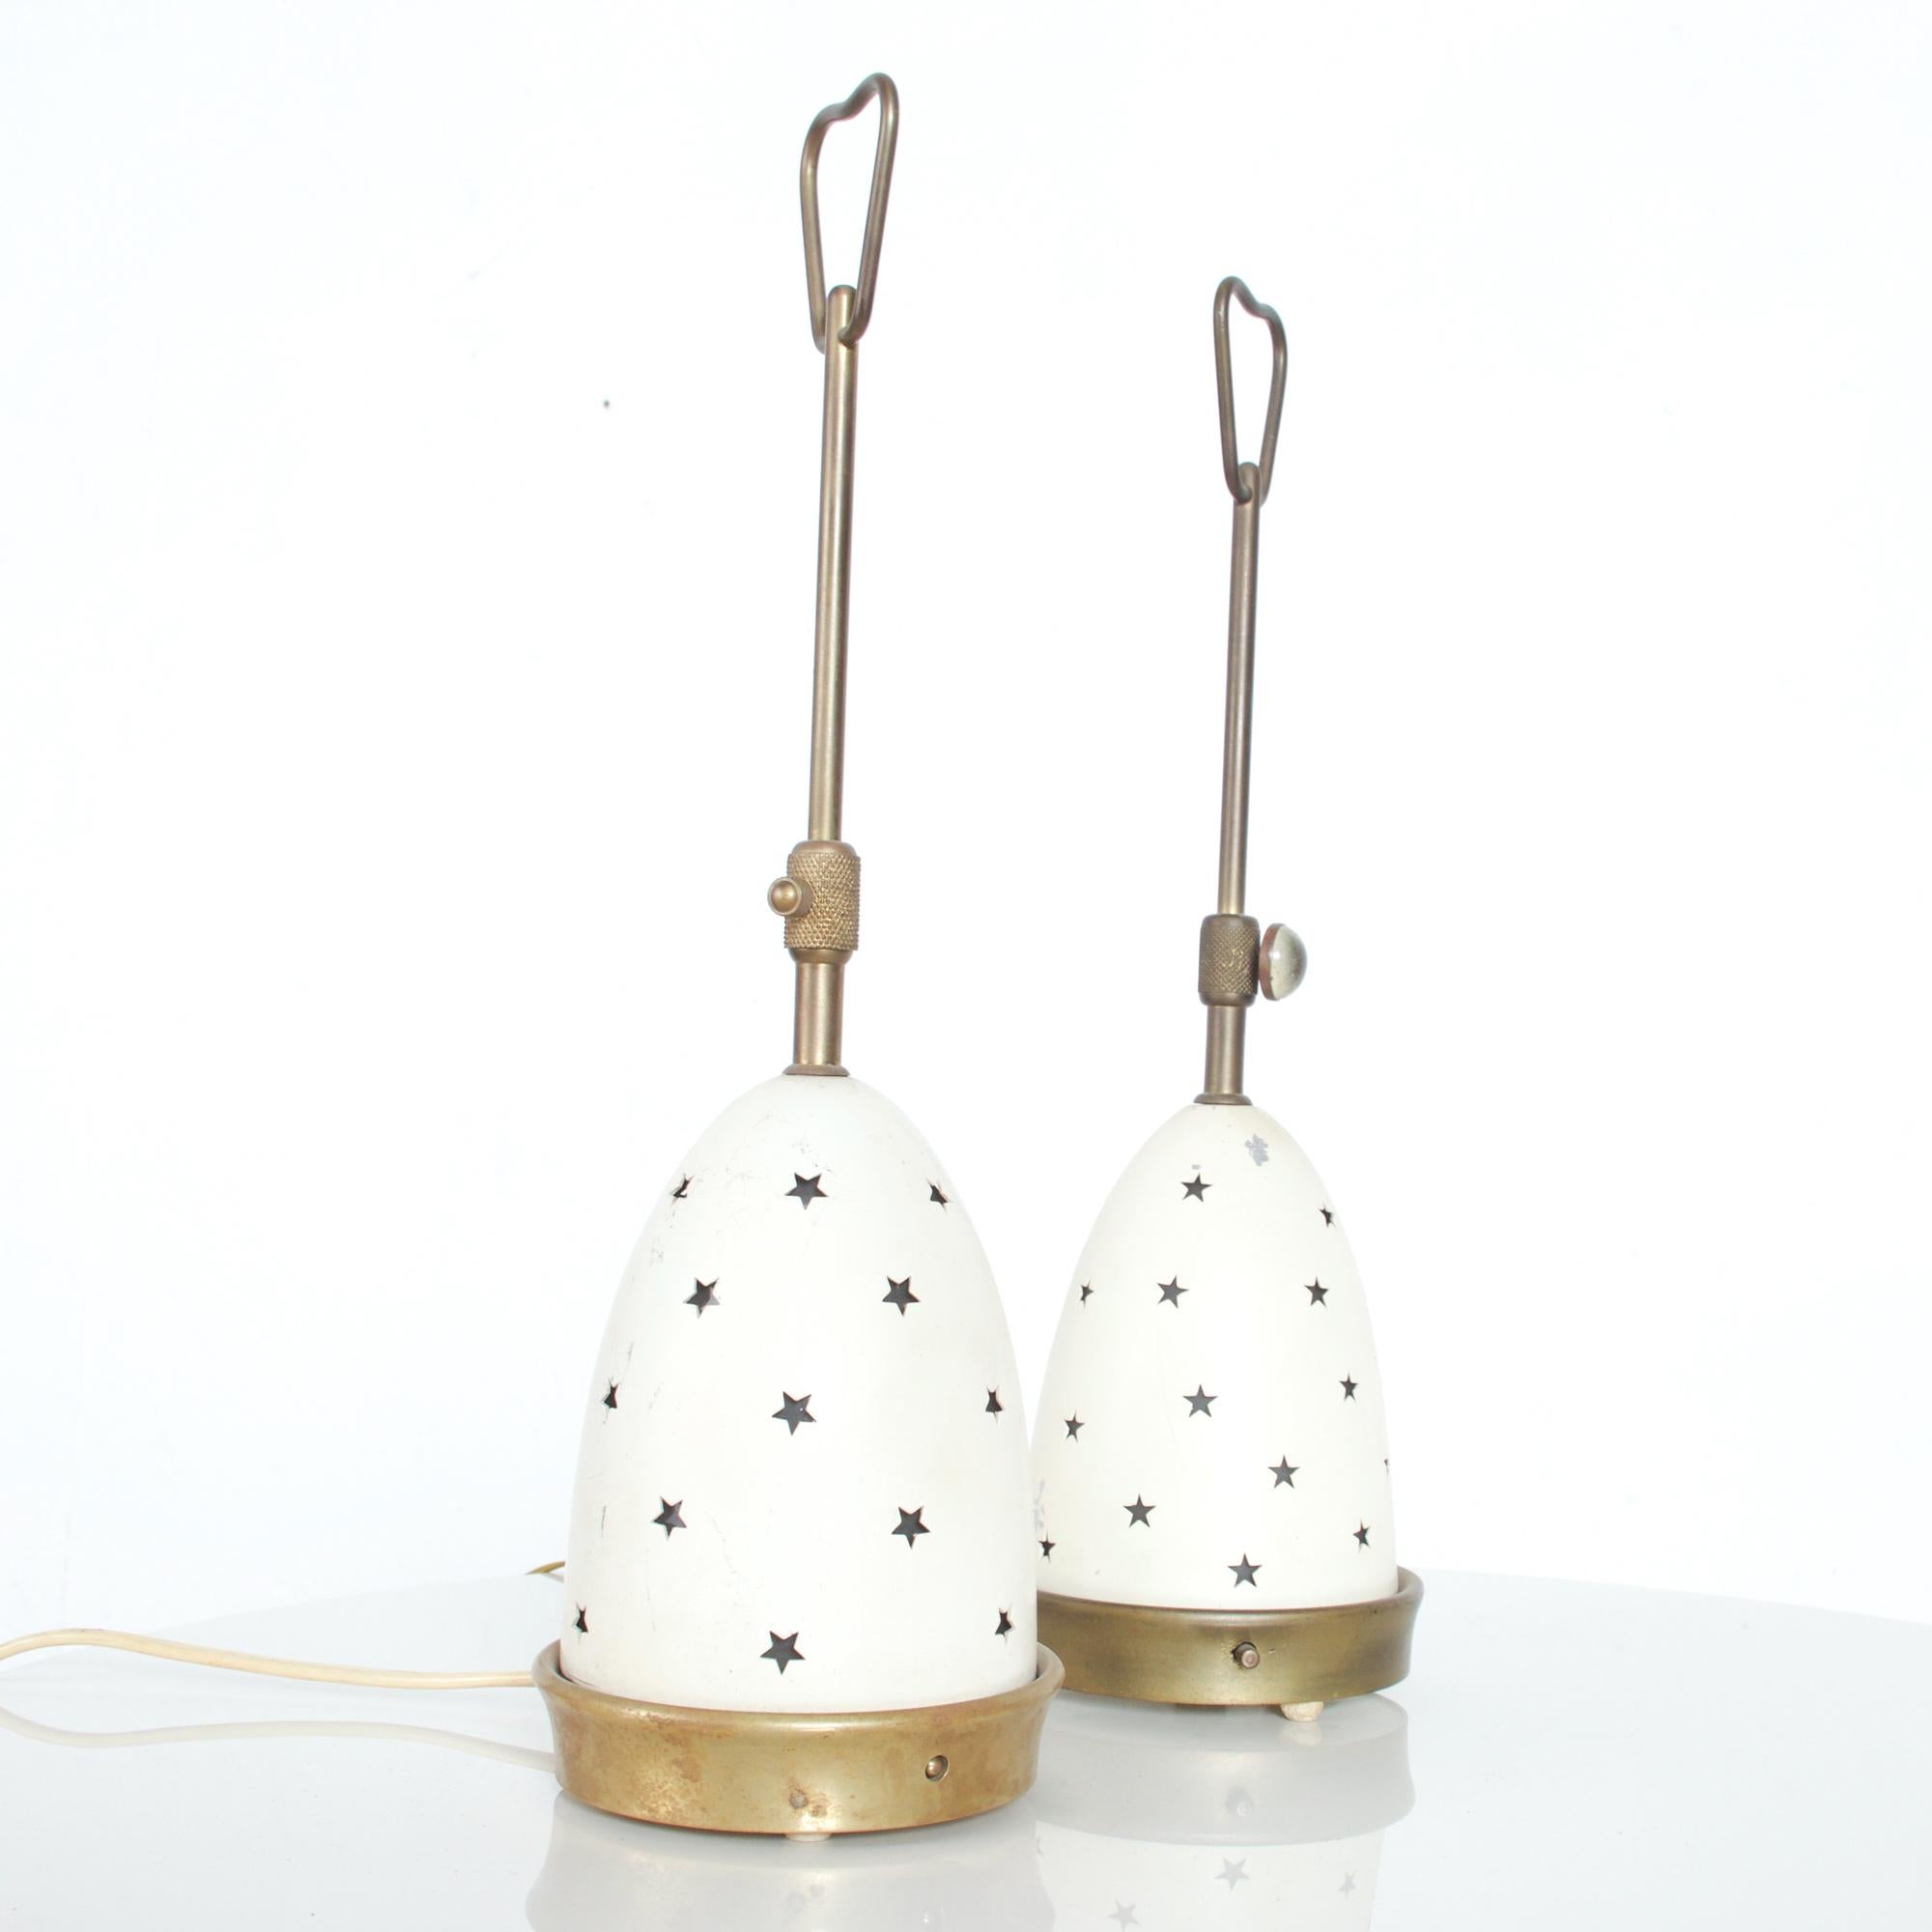 Lovely pair of Table Lamps Stelline Accent Lamps model 12291 designed by Angelo Lelli for Arredoluce Italy 1950s.
Lamps have a brass structure and a double shade in frosted opaline glass and metal. 
The outer shade has a die cut star pattern.
The